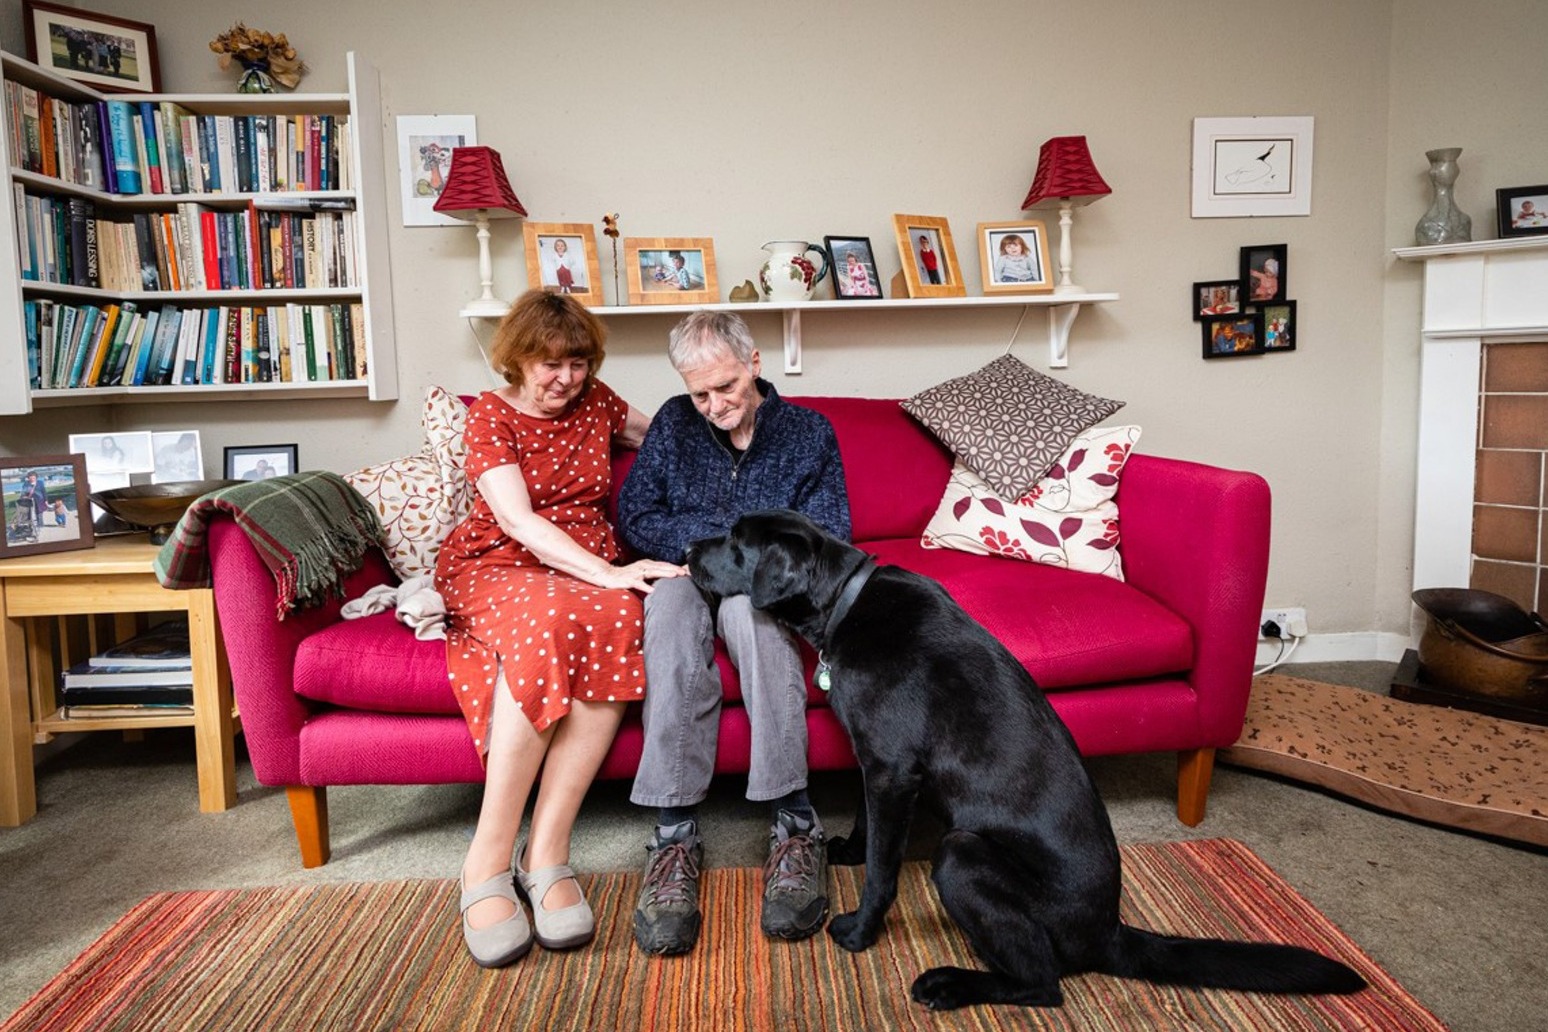 Labrador trained to help dementia patients seeking home 